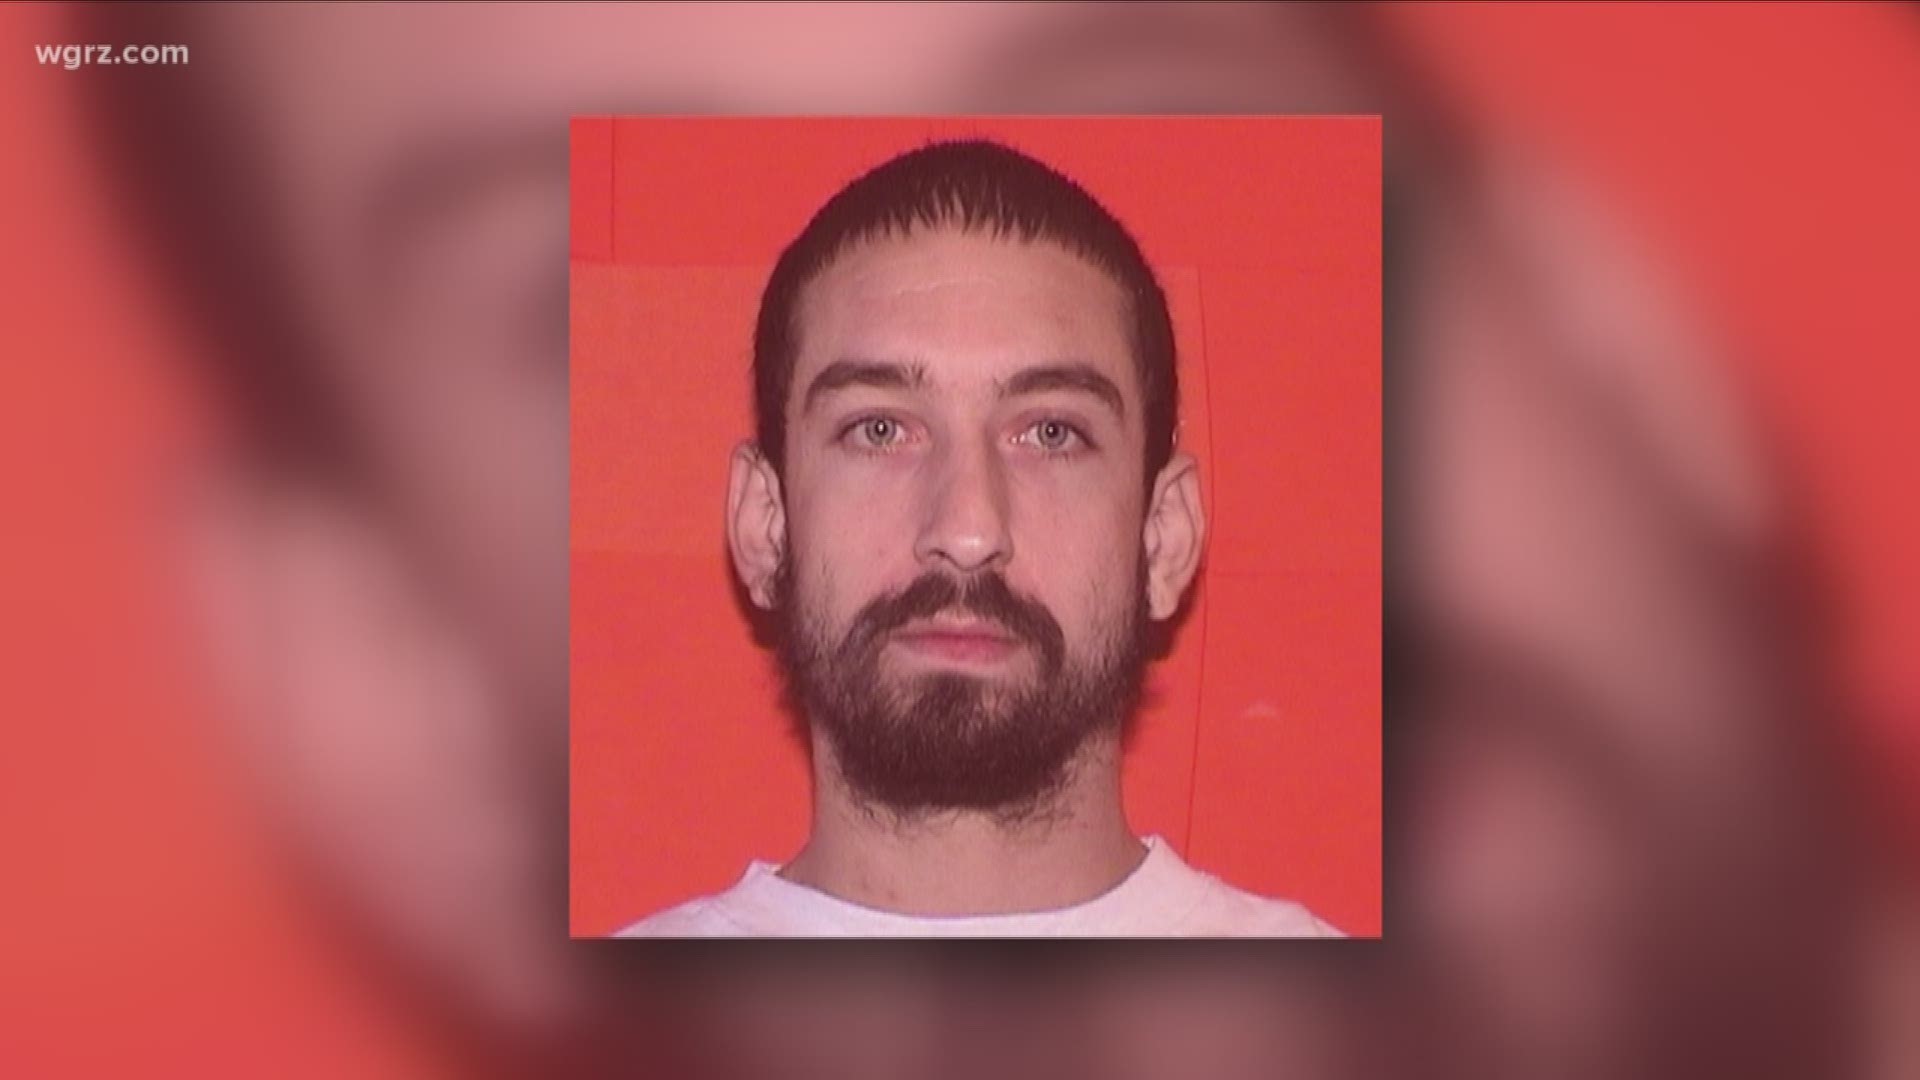 A wanted man from Ohio was captured in Cheektowaga after police say he kidnapped 5 children and their mother.